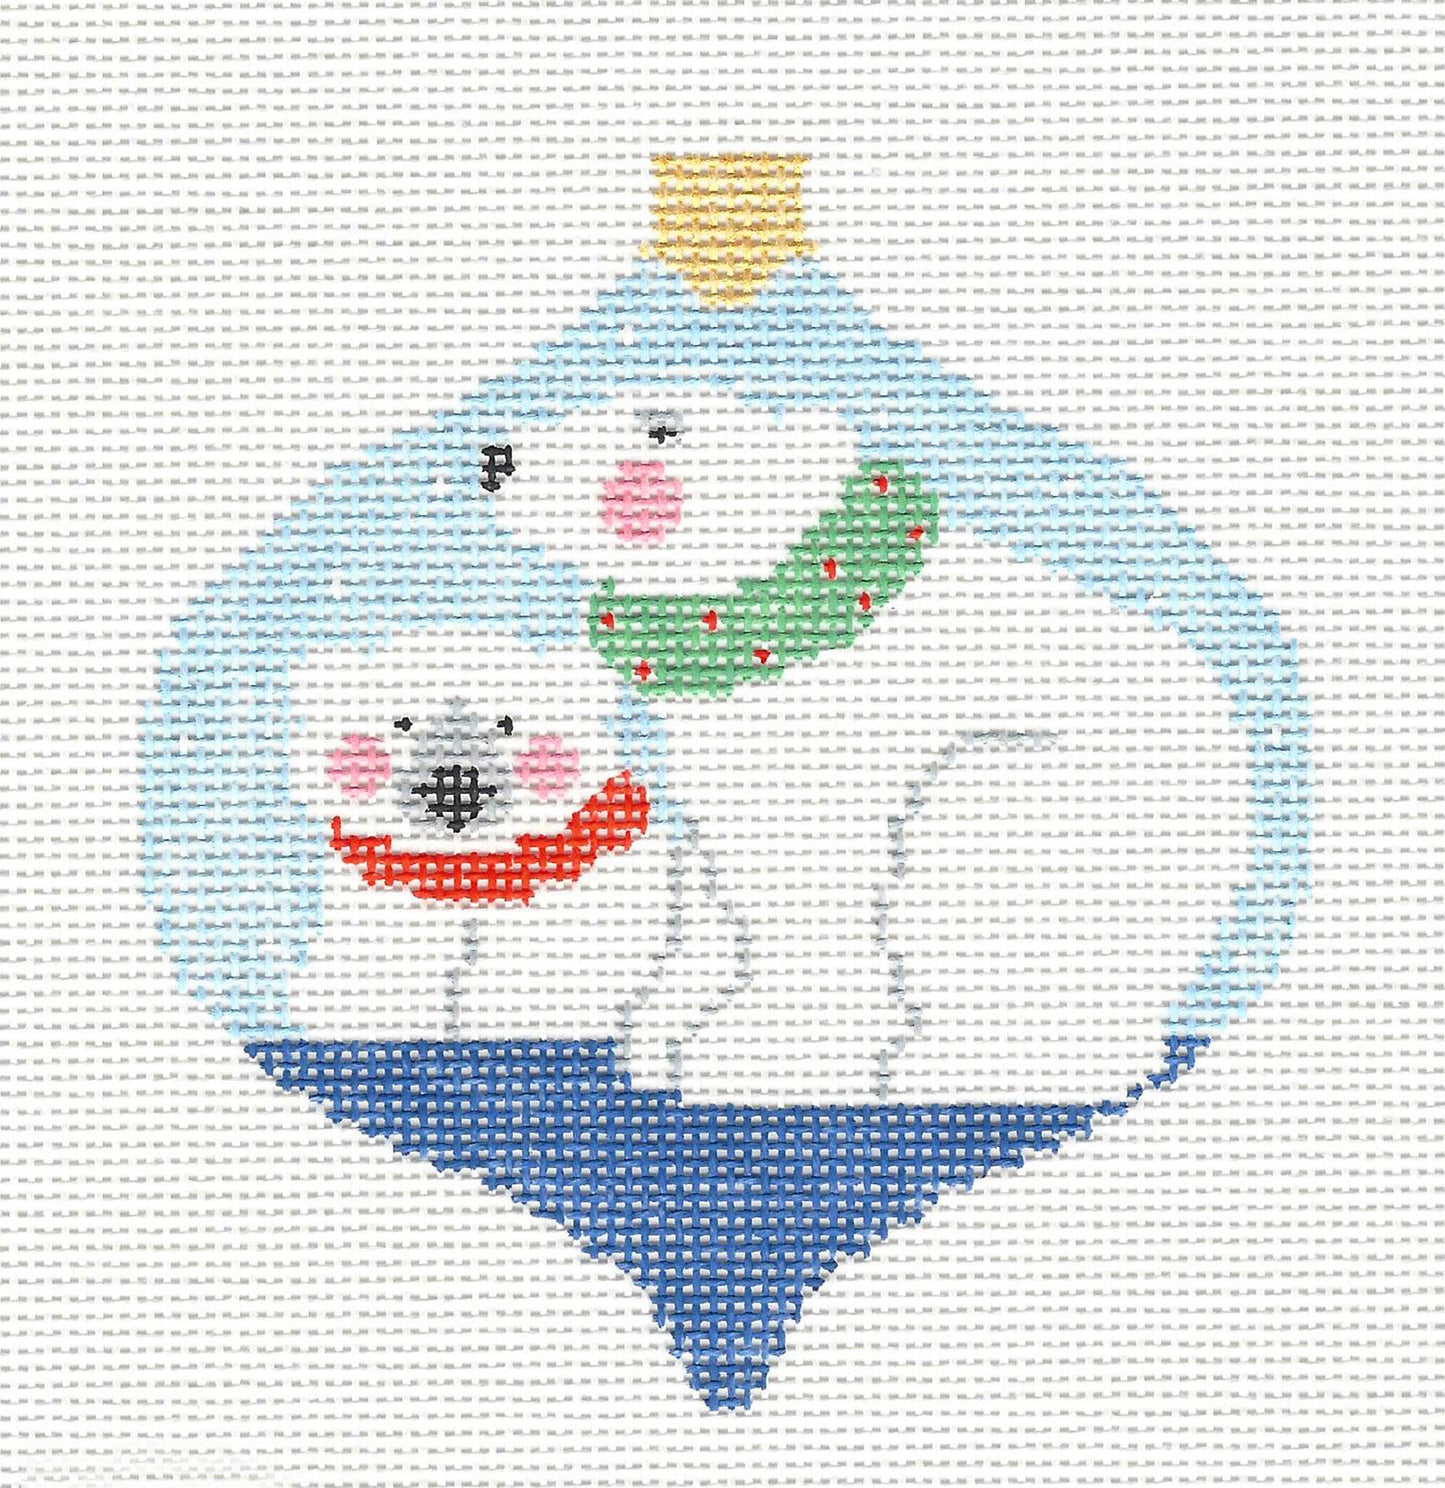 Bauble ~ Holiday Polar Bears handpainted 18 mesh Needlepoint Canvas by Kathy Schenkel